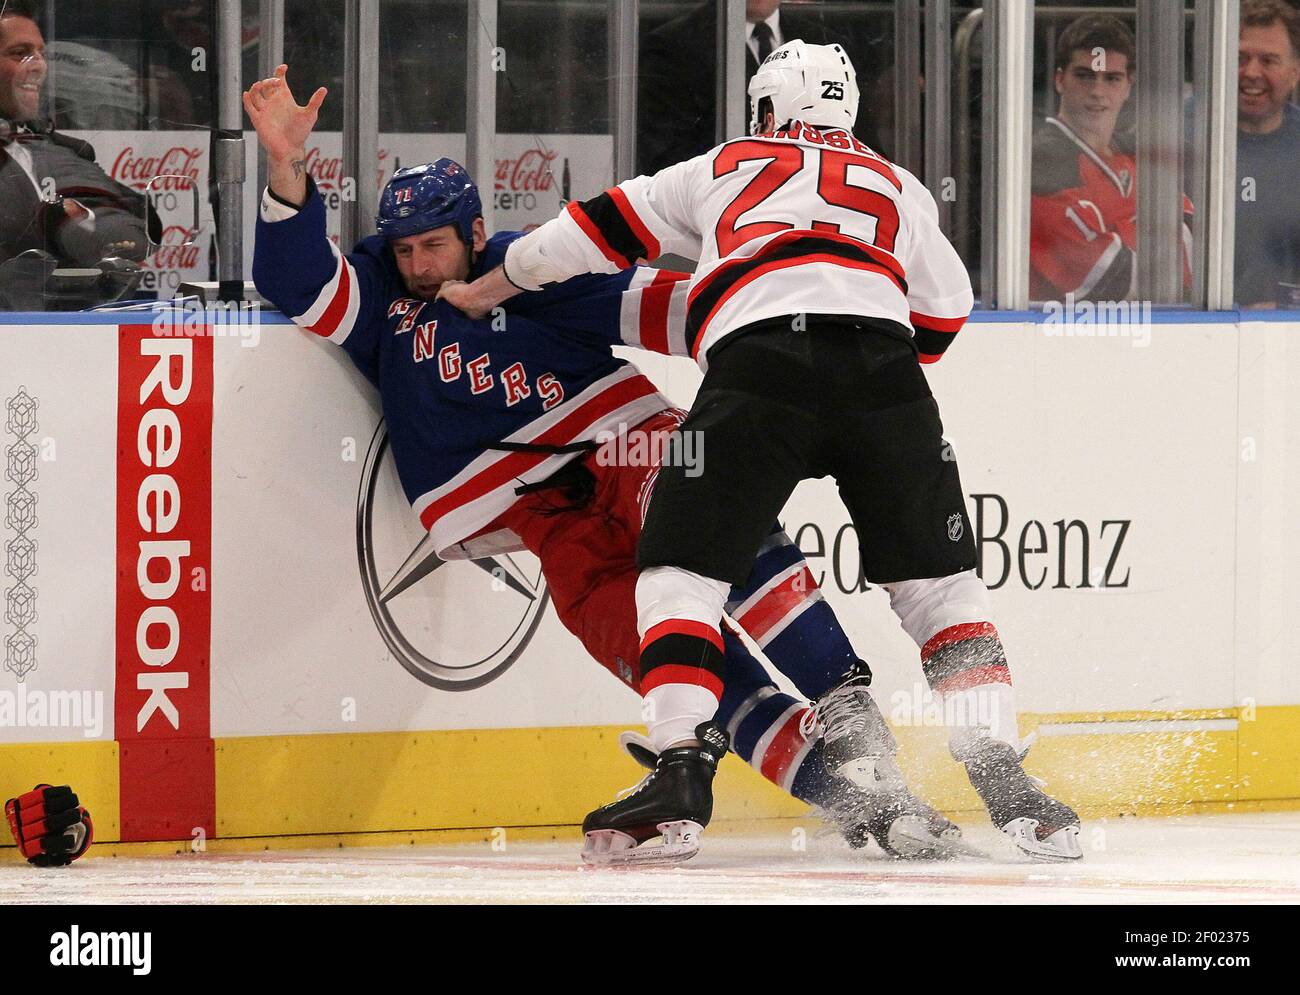 Mike Rupp roughing Marty Brodeur. NY Rangers vs New Jersey Devils